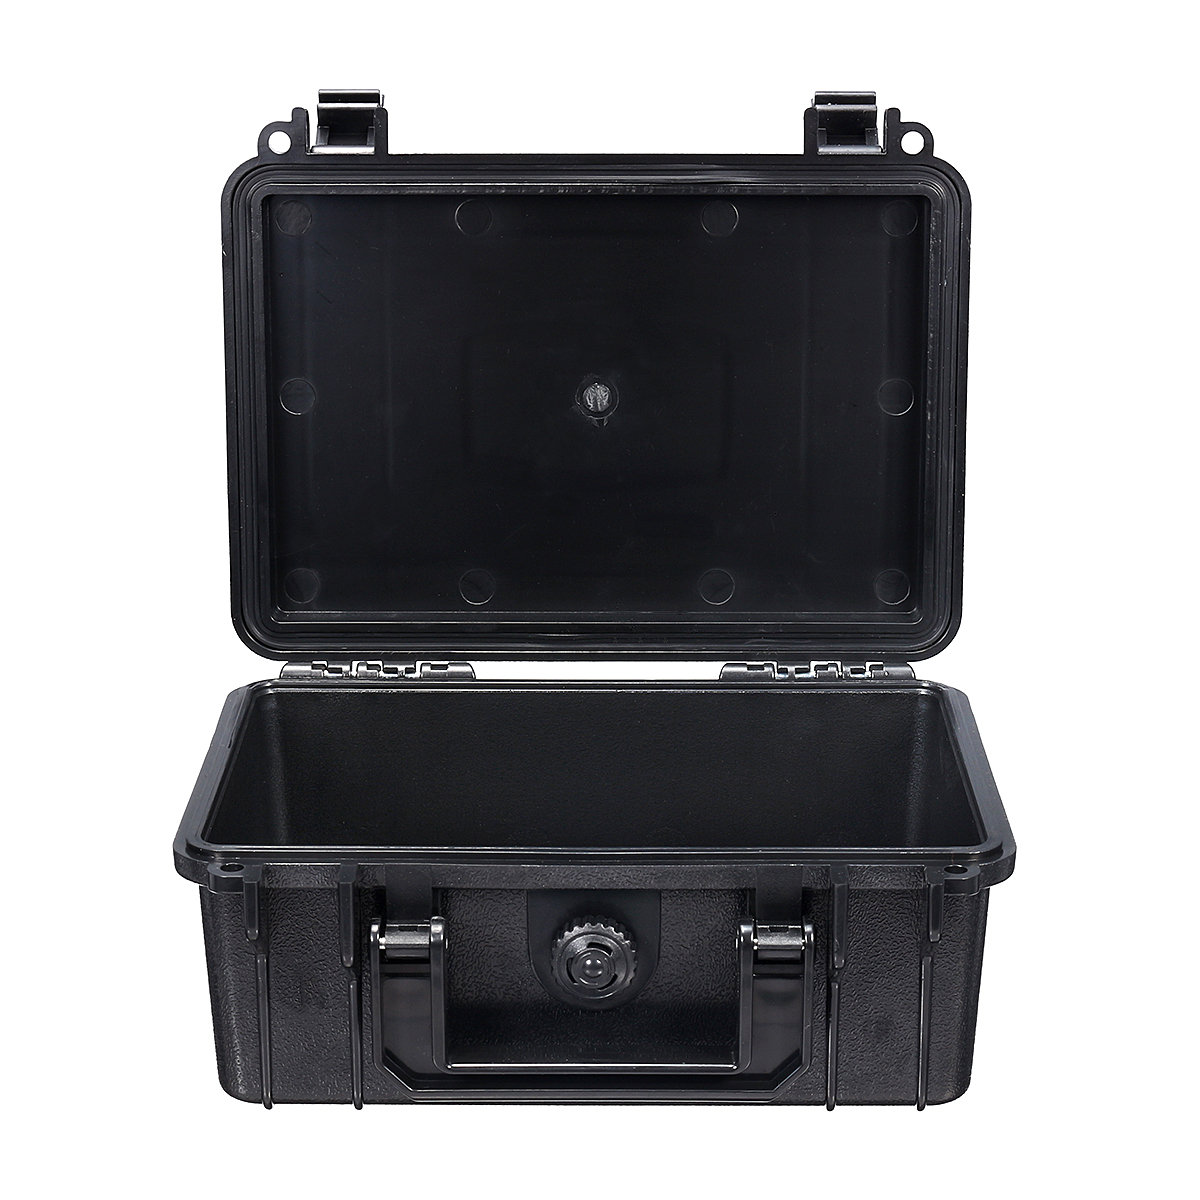 Find 210x165x85mm Waterproof Hard Carry Camera Lens Photography Tool Case Bag Storage Box with Sponge for Sale on Gipsybee.com with cryptocurrencies